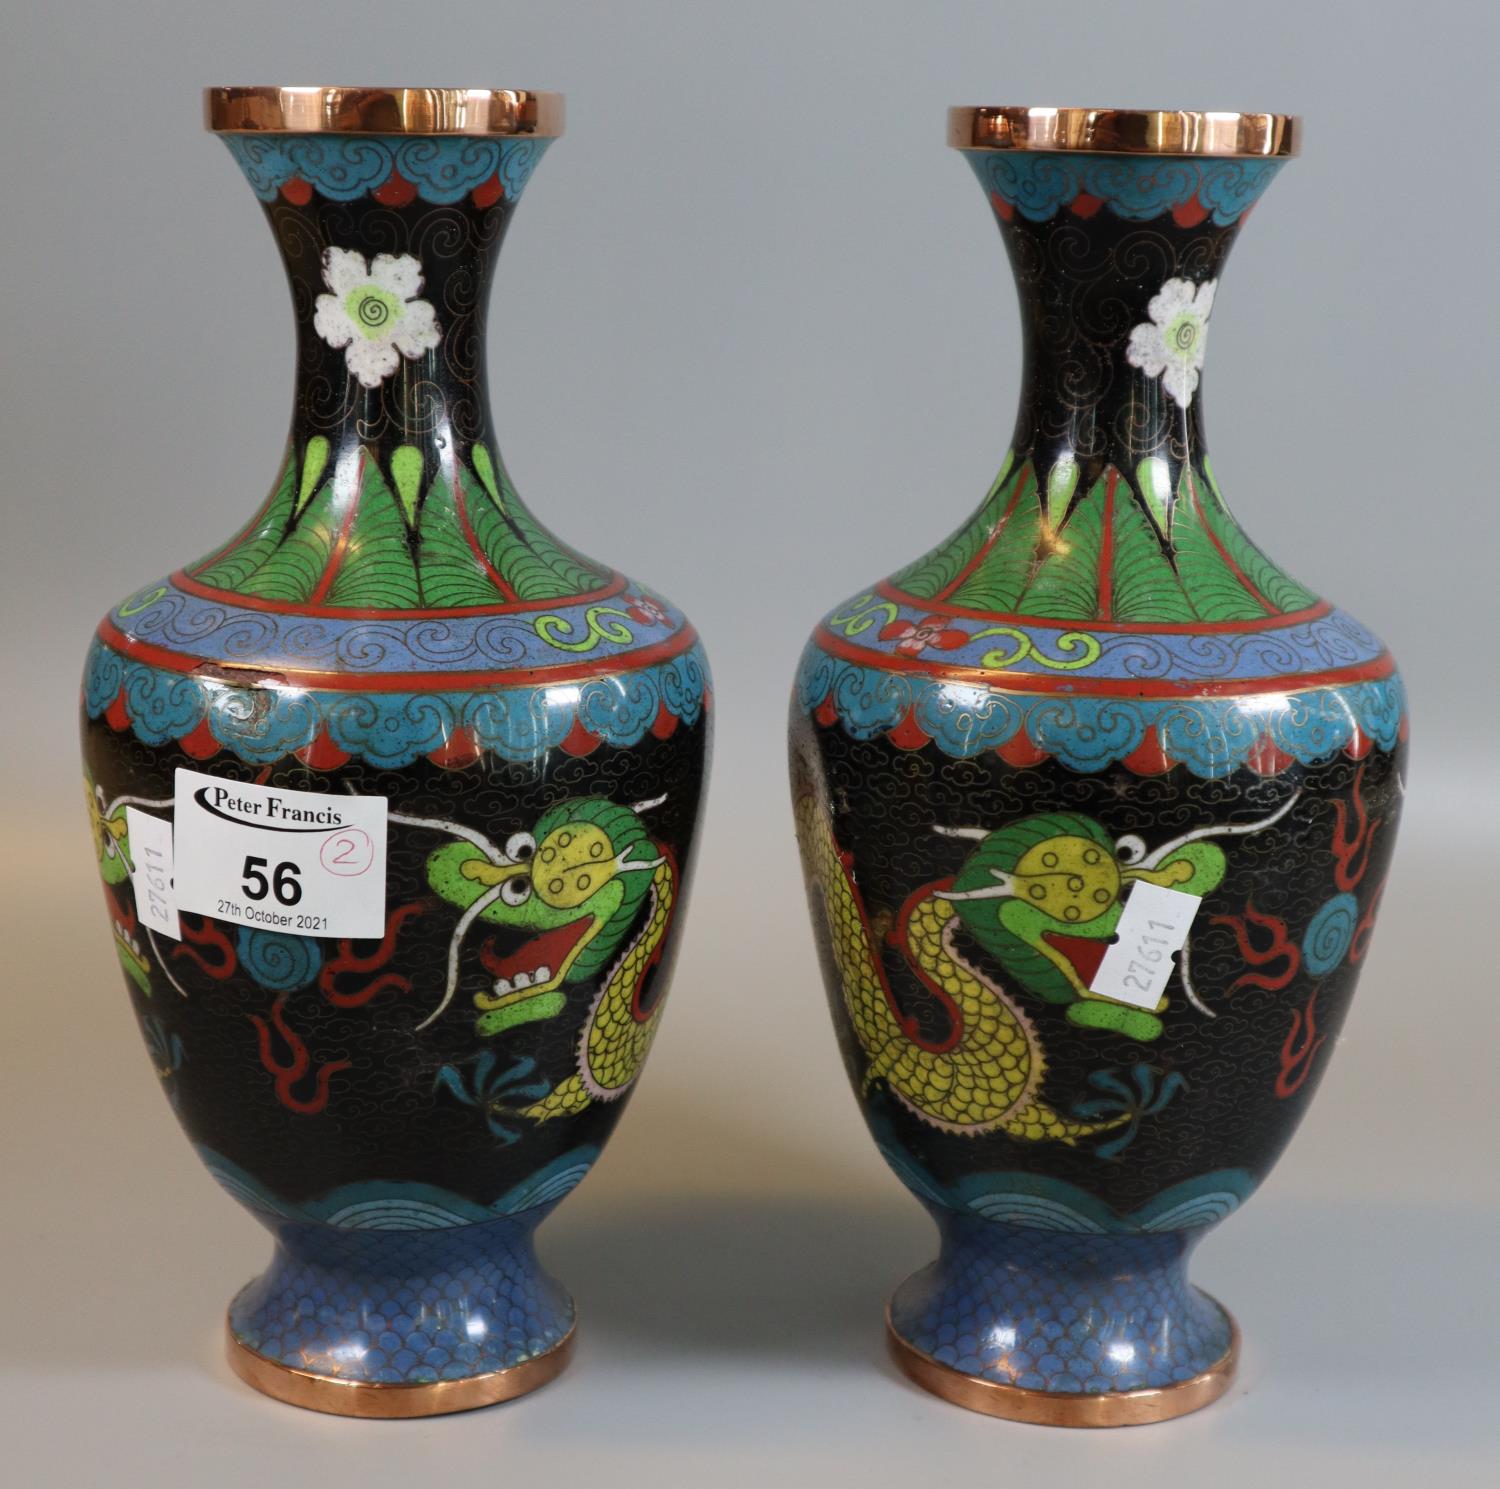 Pair of Chinese black ground cloisonne baluster shaped vases depicting dragons chasing flaming